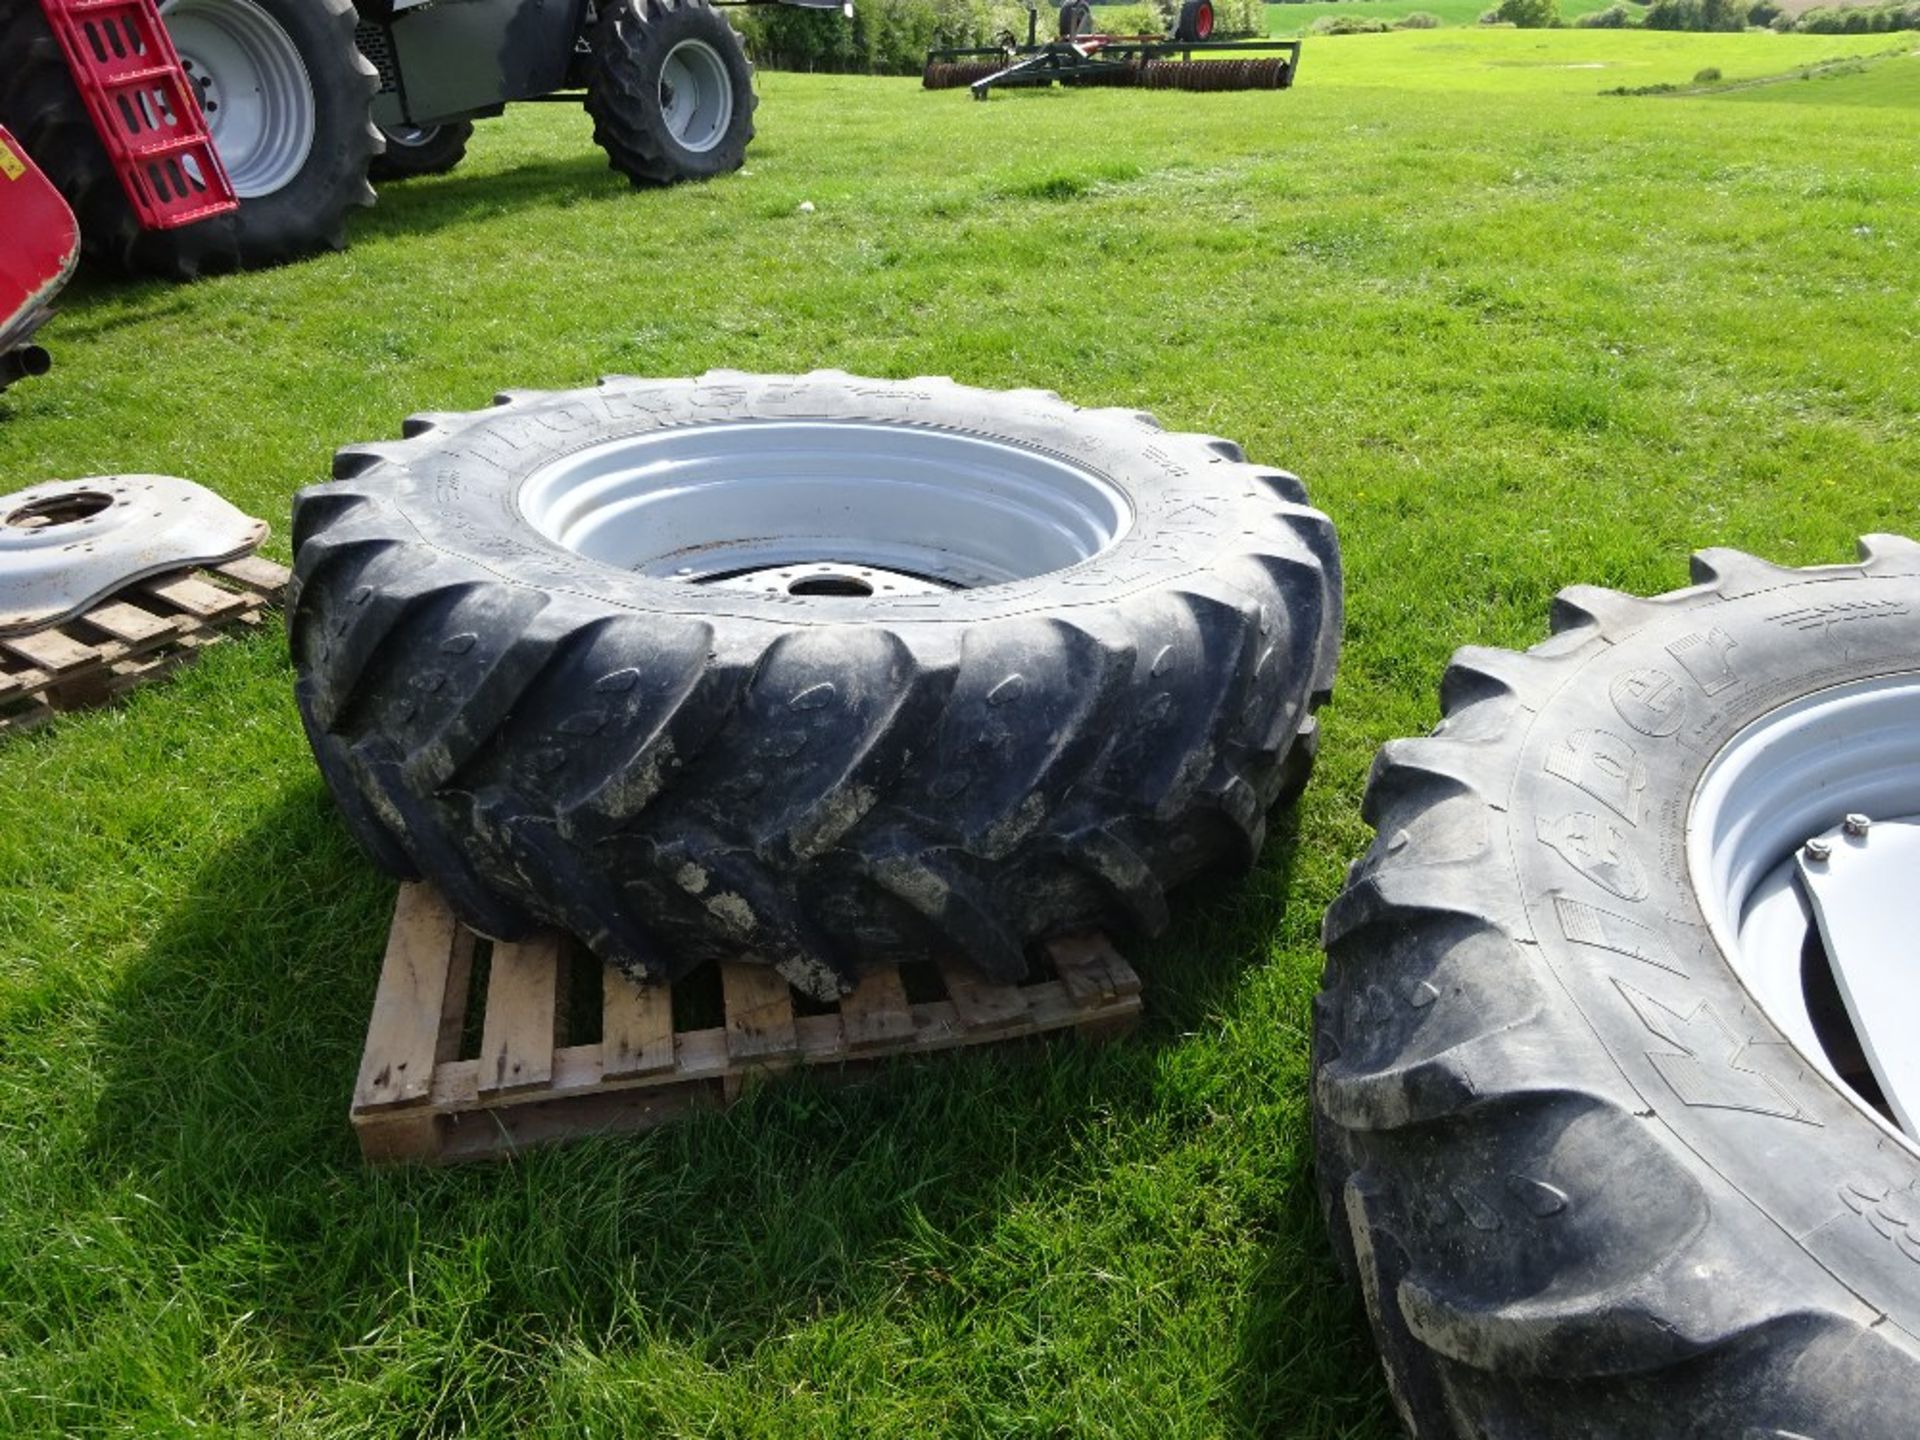 PAIR OF WHEELS 460/85 R38 TO FIT MF TRACTOR - Image 2 of 4